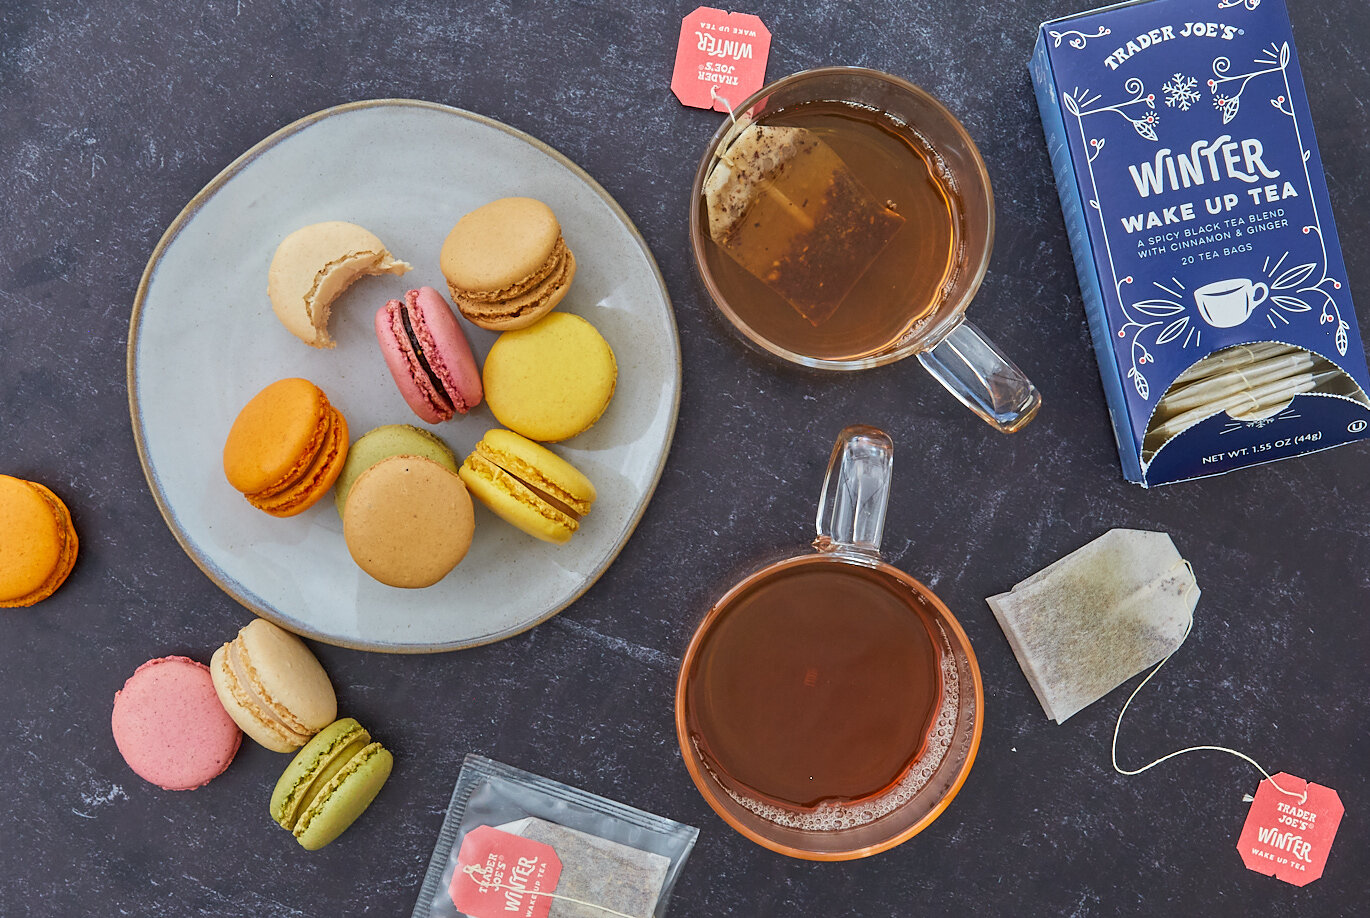 Trader Joe's Winter Wake Up Tea steeping in two mugs, a plate of Macaron cookies next to them